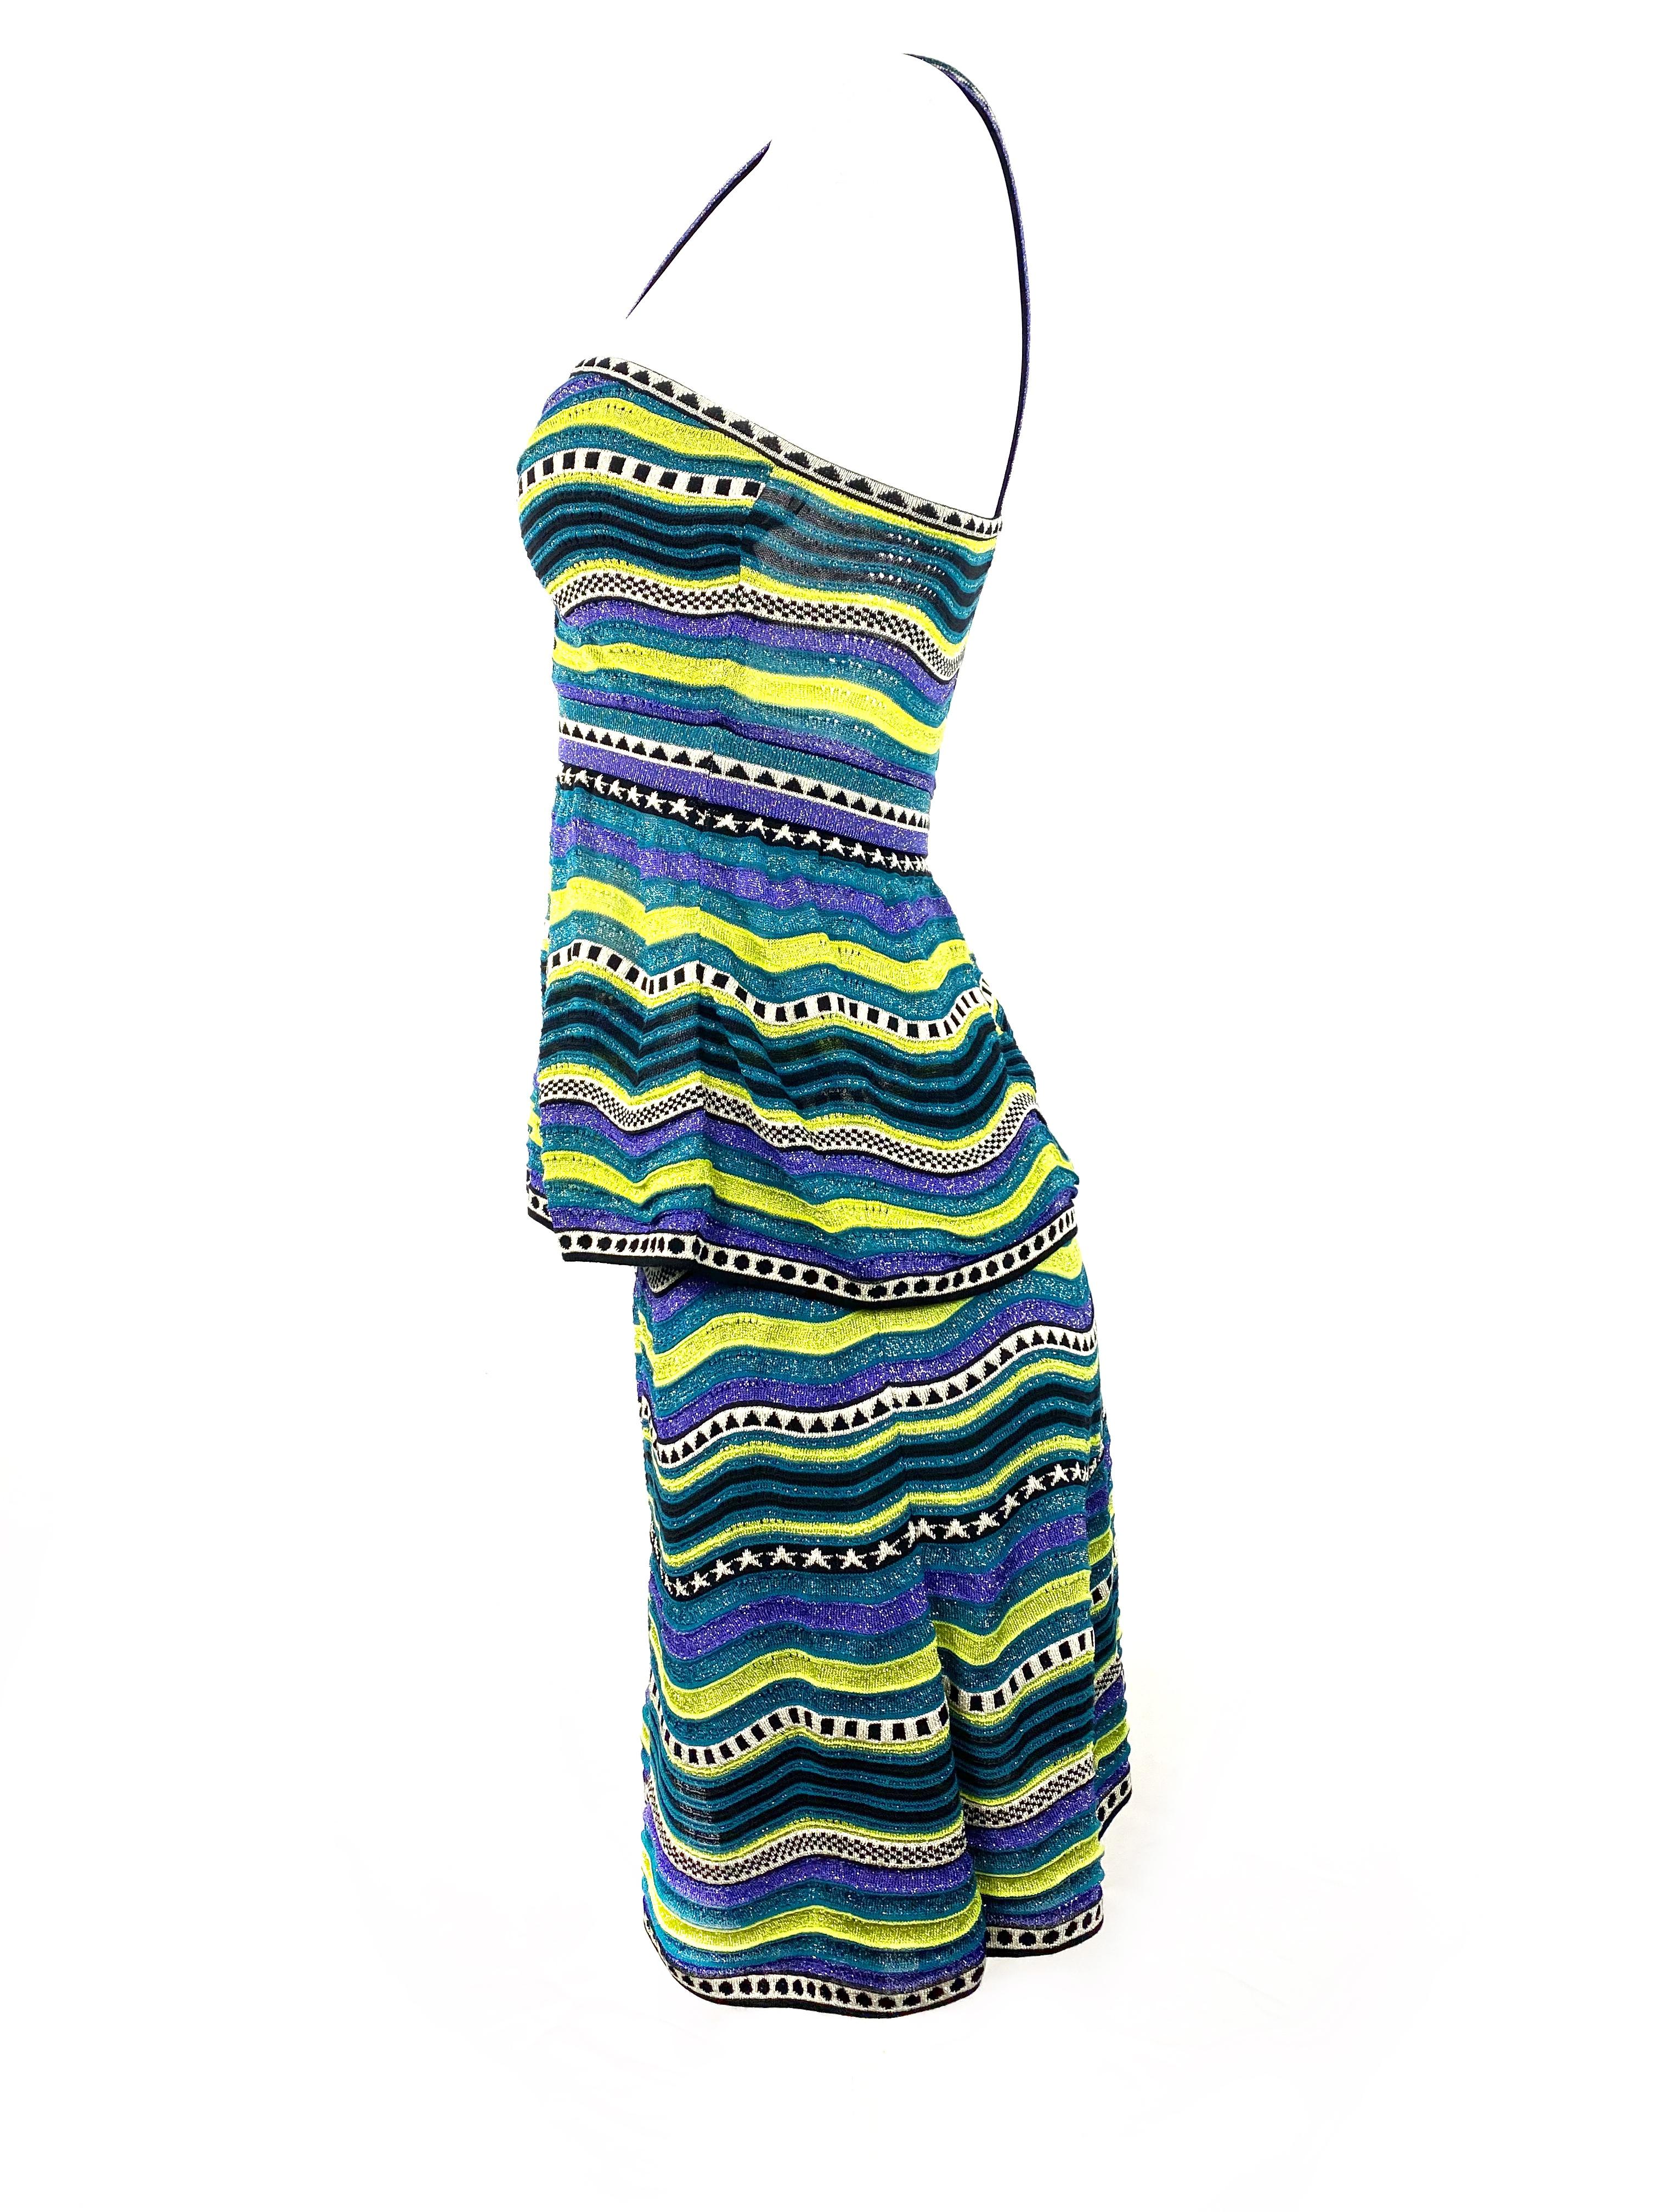 Vintage M MIssoni Multicolor Striped Knit Top and Skirt Set

Product details:
Featuring blue, green, black and white striped pattern with metallic detail. 
Sleeveless top is size 40. Length is 24